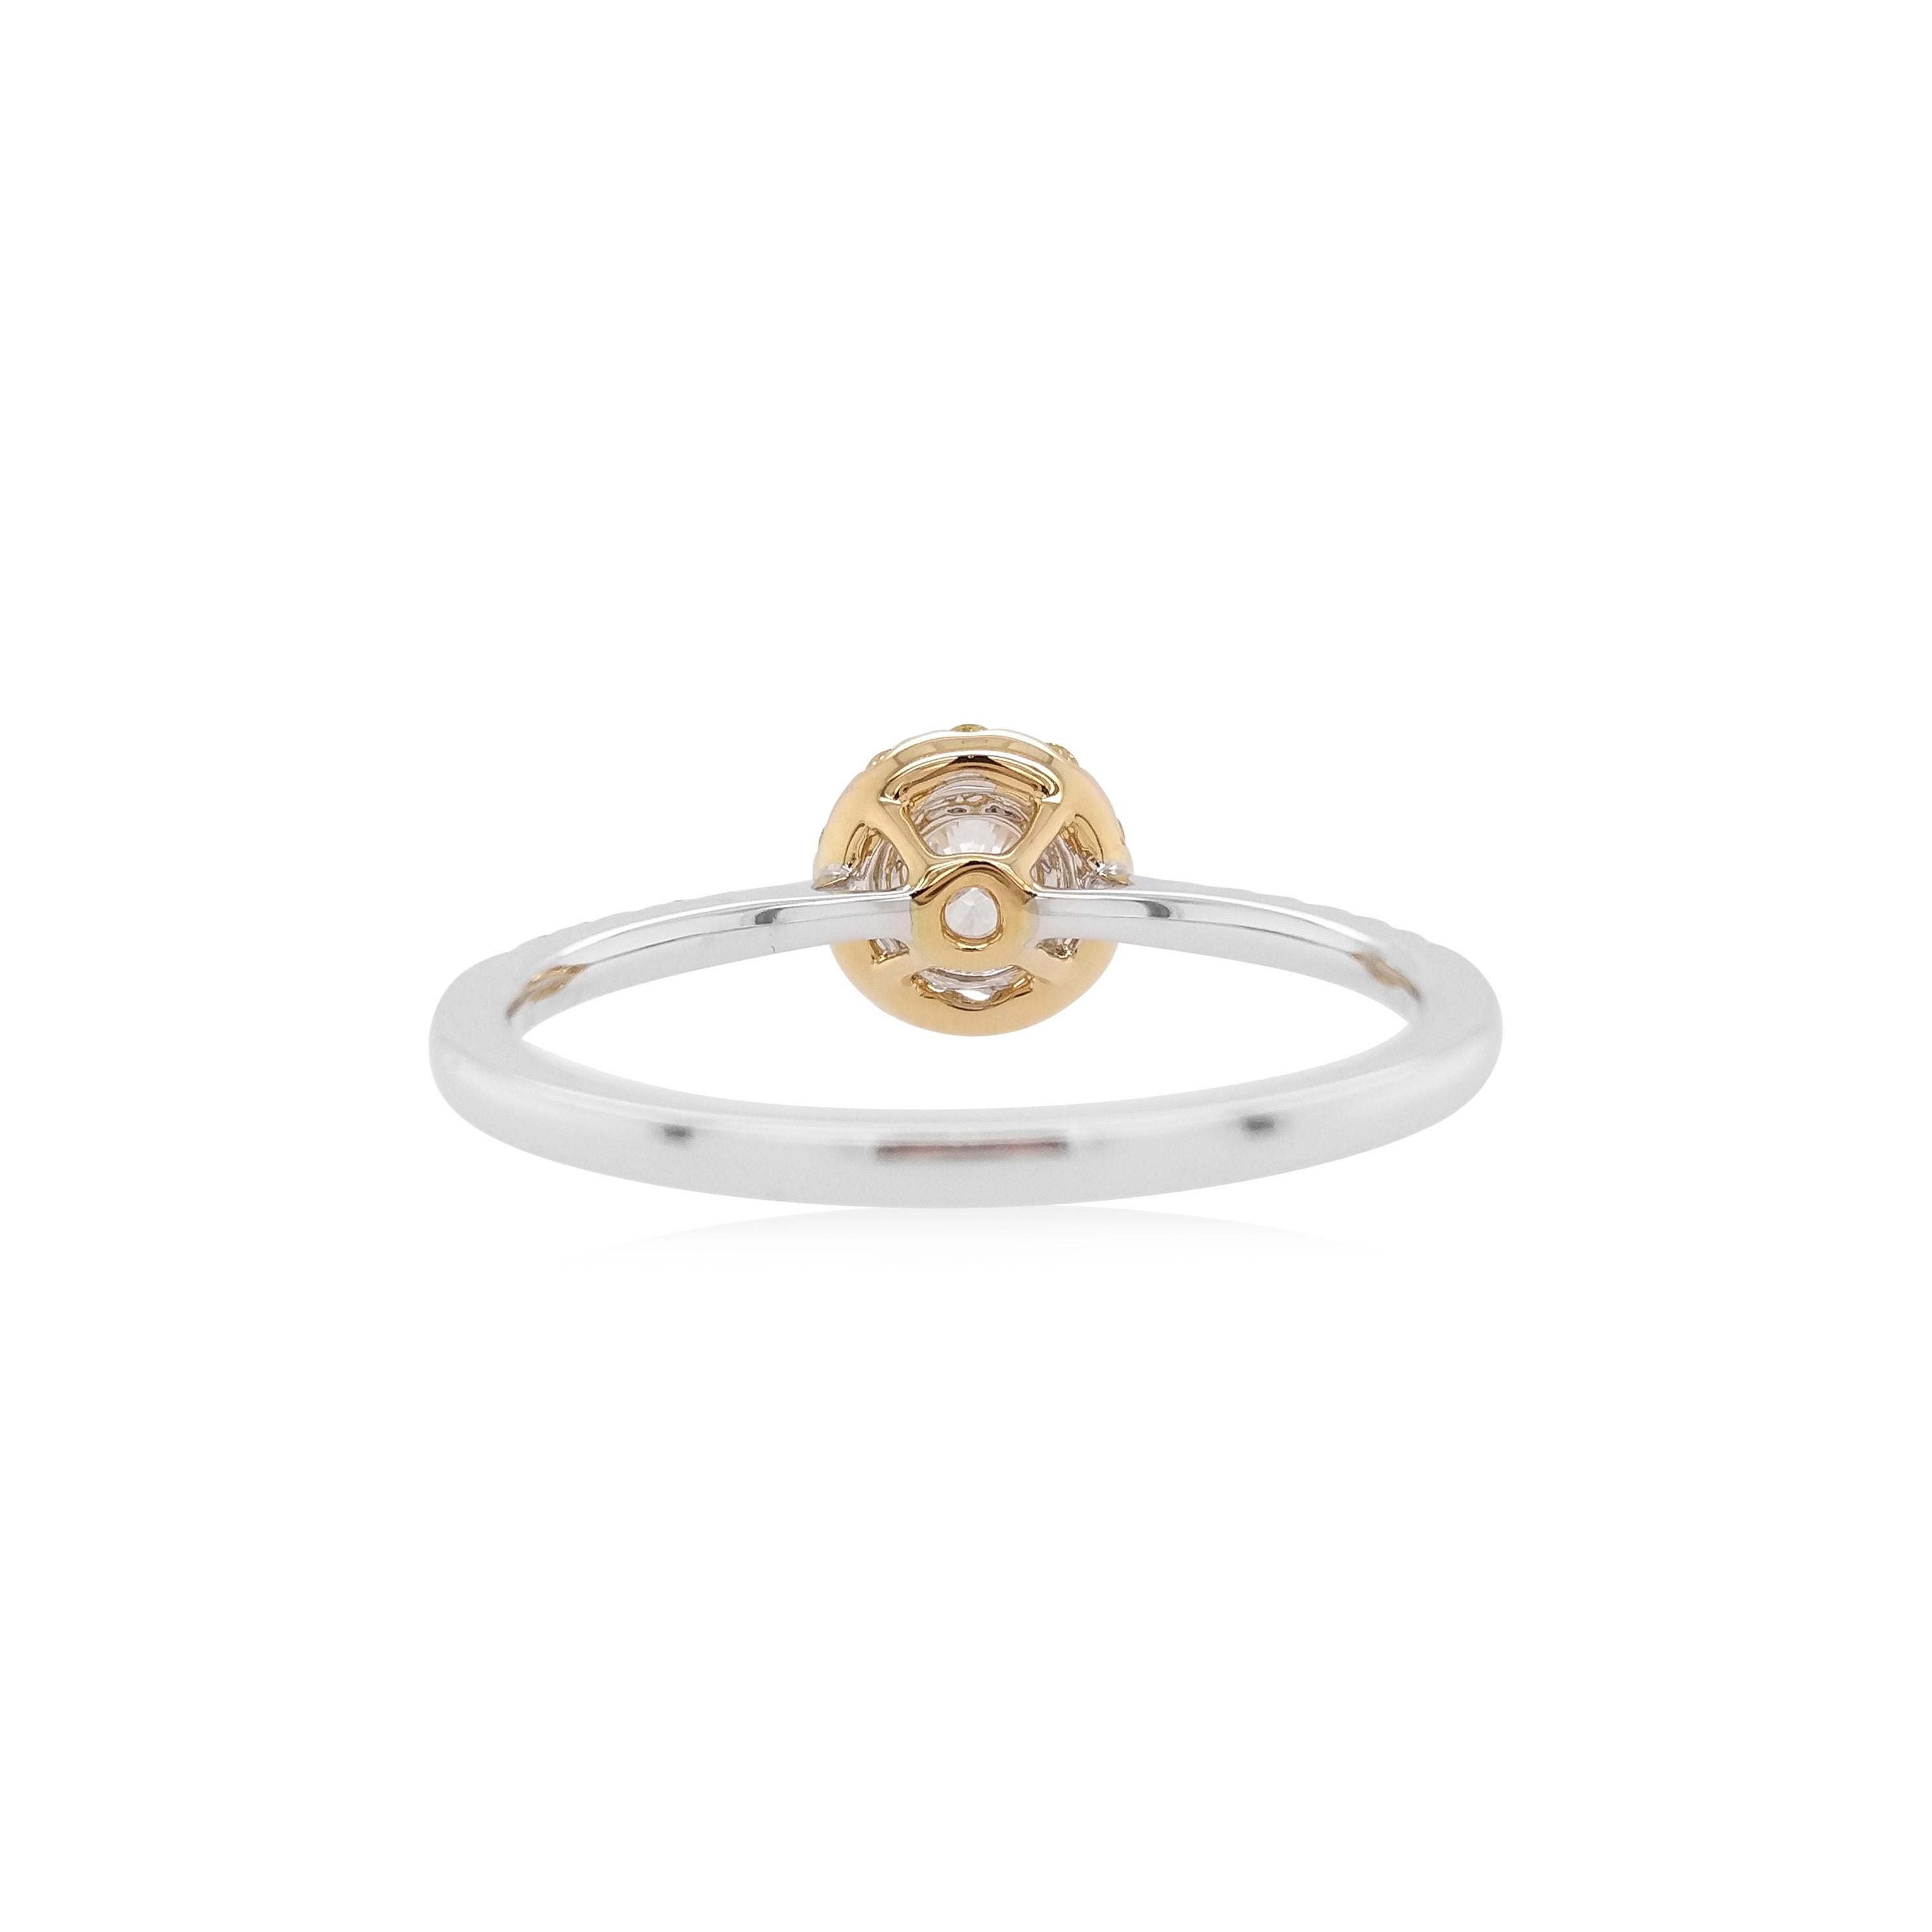 This elegant ring features an excellent quality round-shaped white diamond at its center, with a delicate yellow diamond halo surrounding it. Set in 18 Karat white and yellow gold to enrich the spectacular hues and the sparkle of the diamonds, this